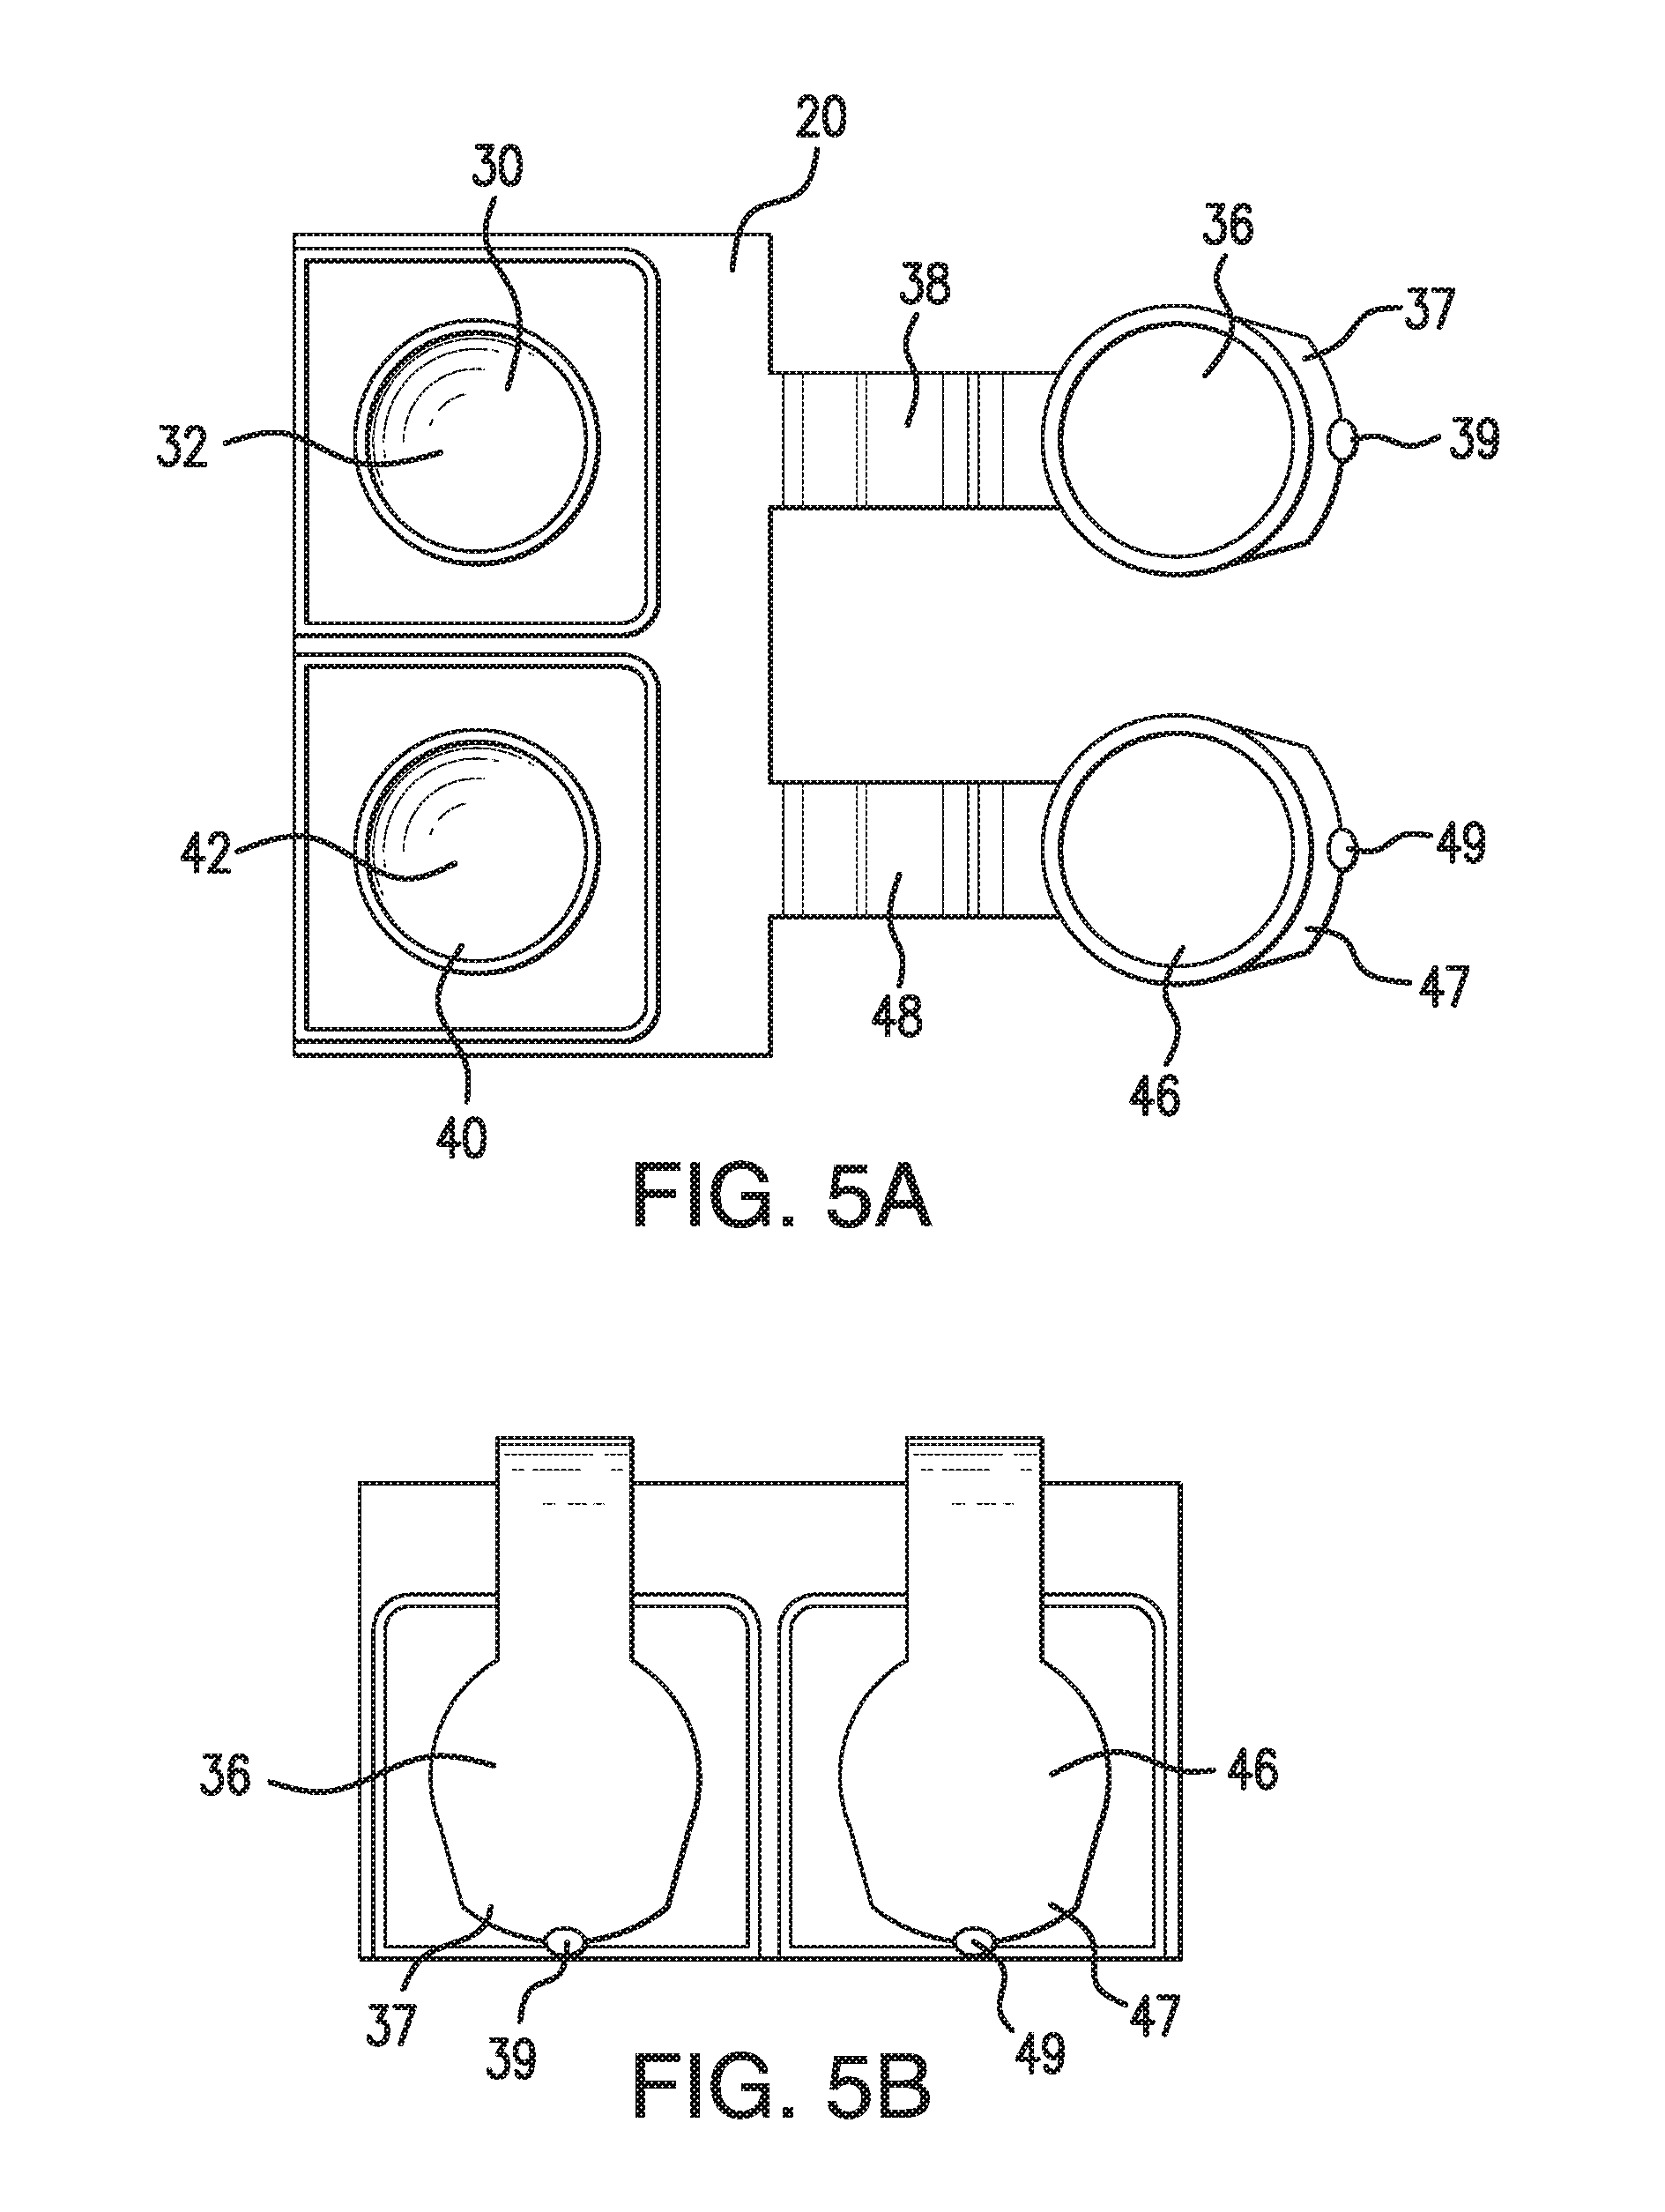 Contact lens case having integrated lens data stowage compartments